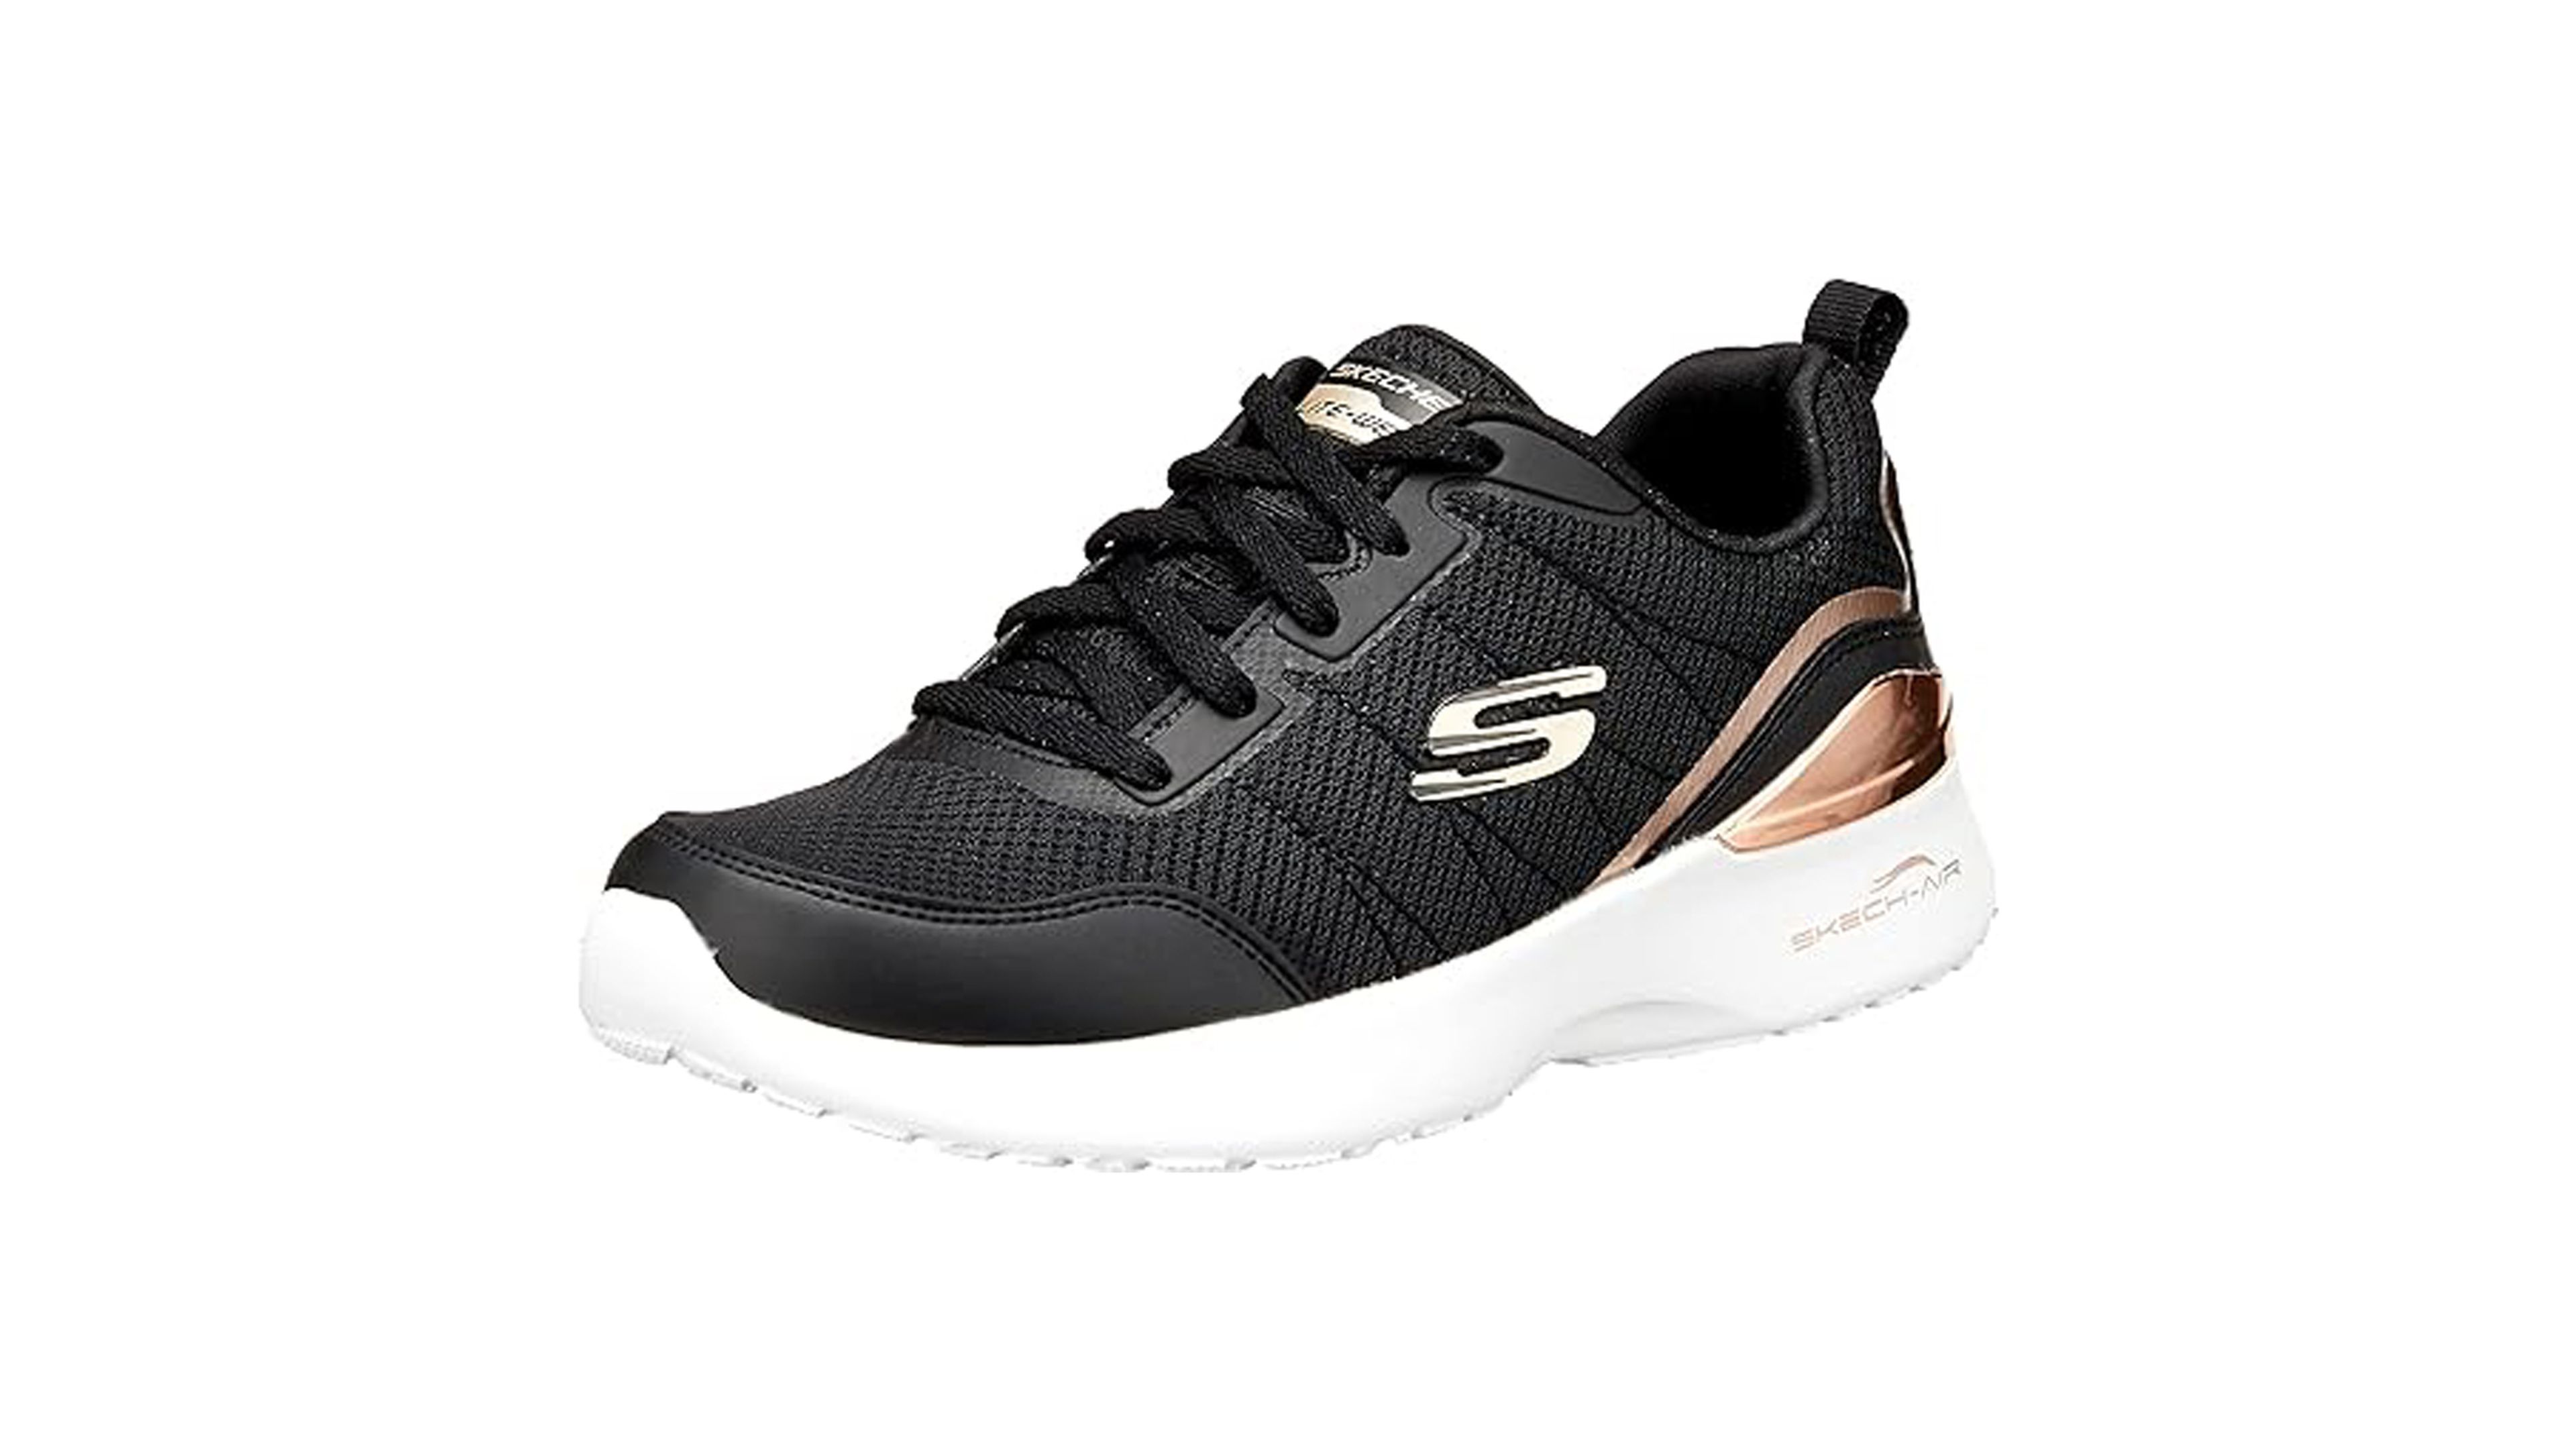 Skechers Skech-Air Dynamight The Halcyon